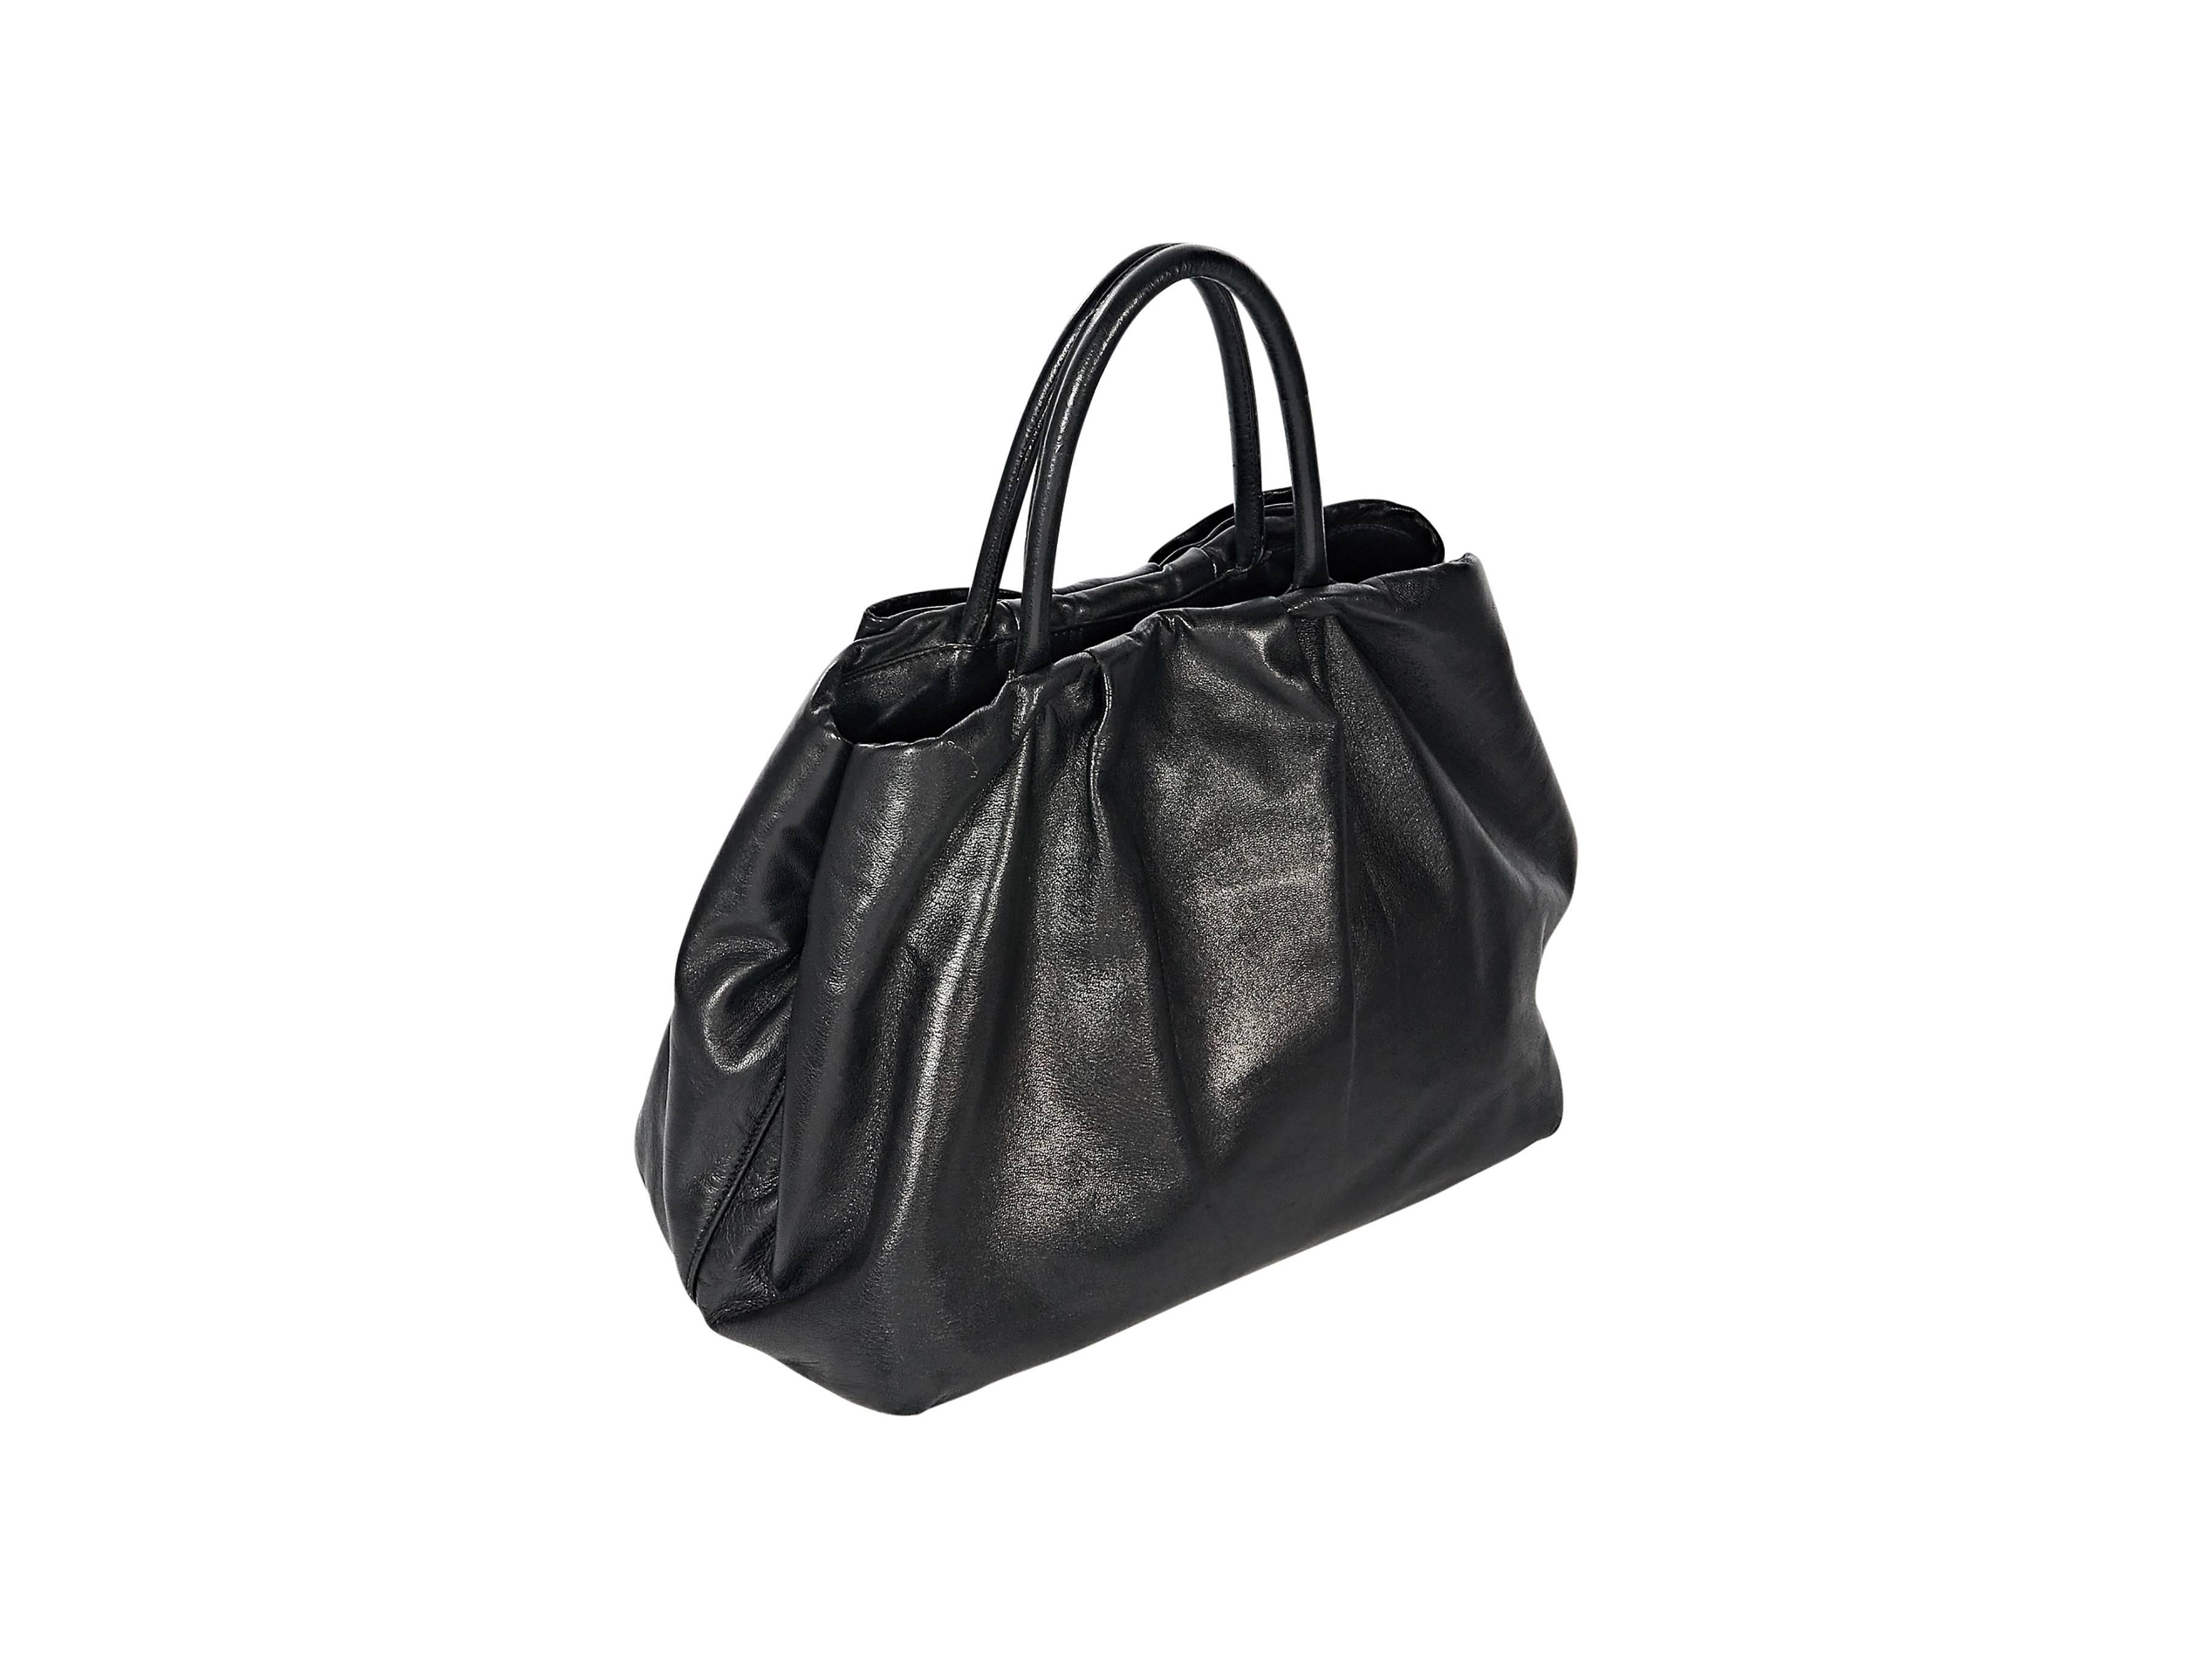 Product details: Black nappa leather tote bag by Prada. Bow accents front. Dual carry handles. Side snaps. Magnetic snap closure. Lined interior with inner zip pockets. Protective metal feet. Goldtone hardware. 11